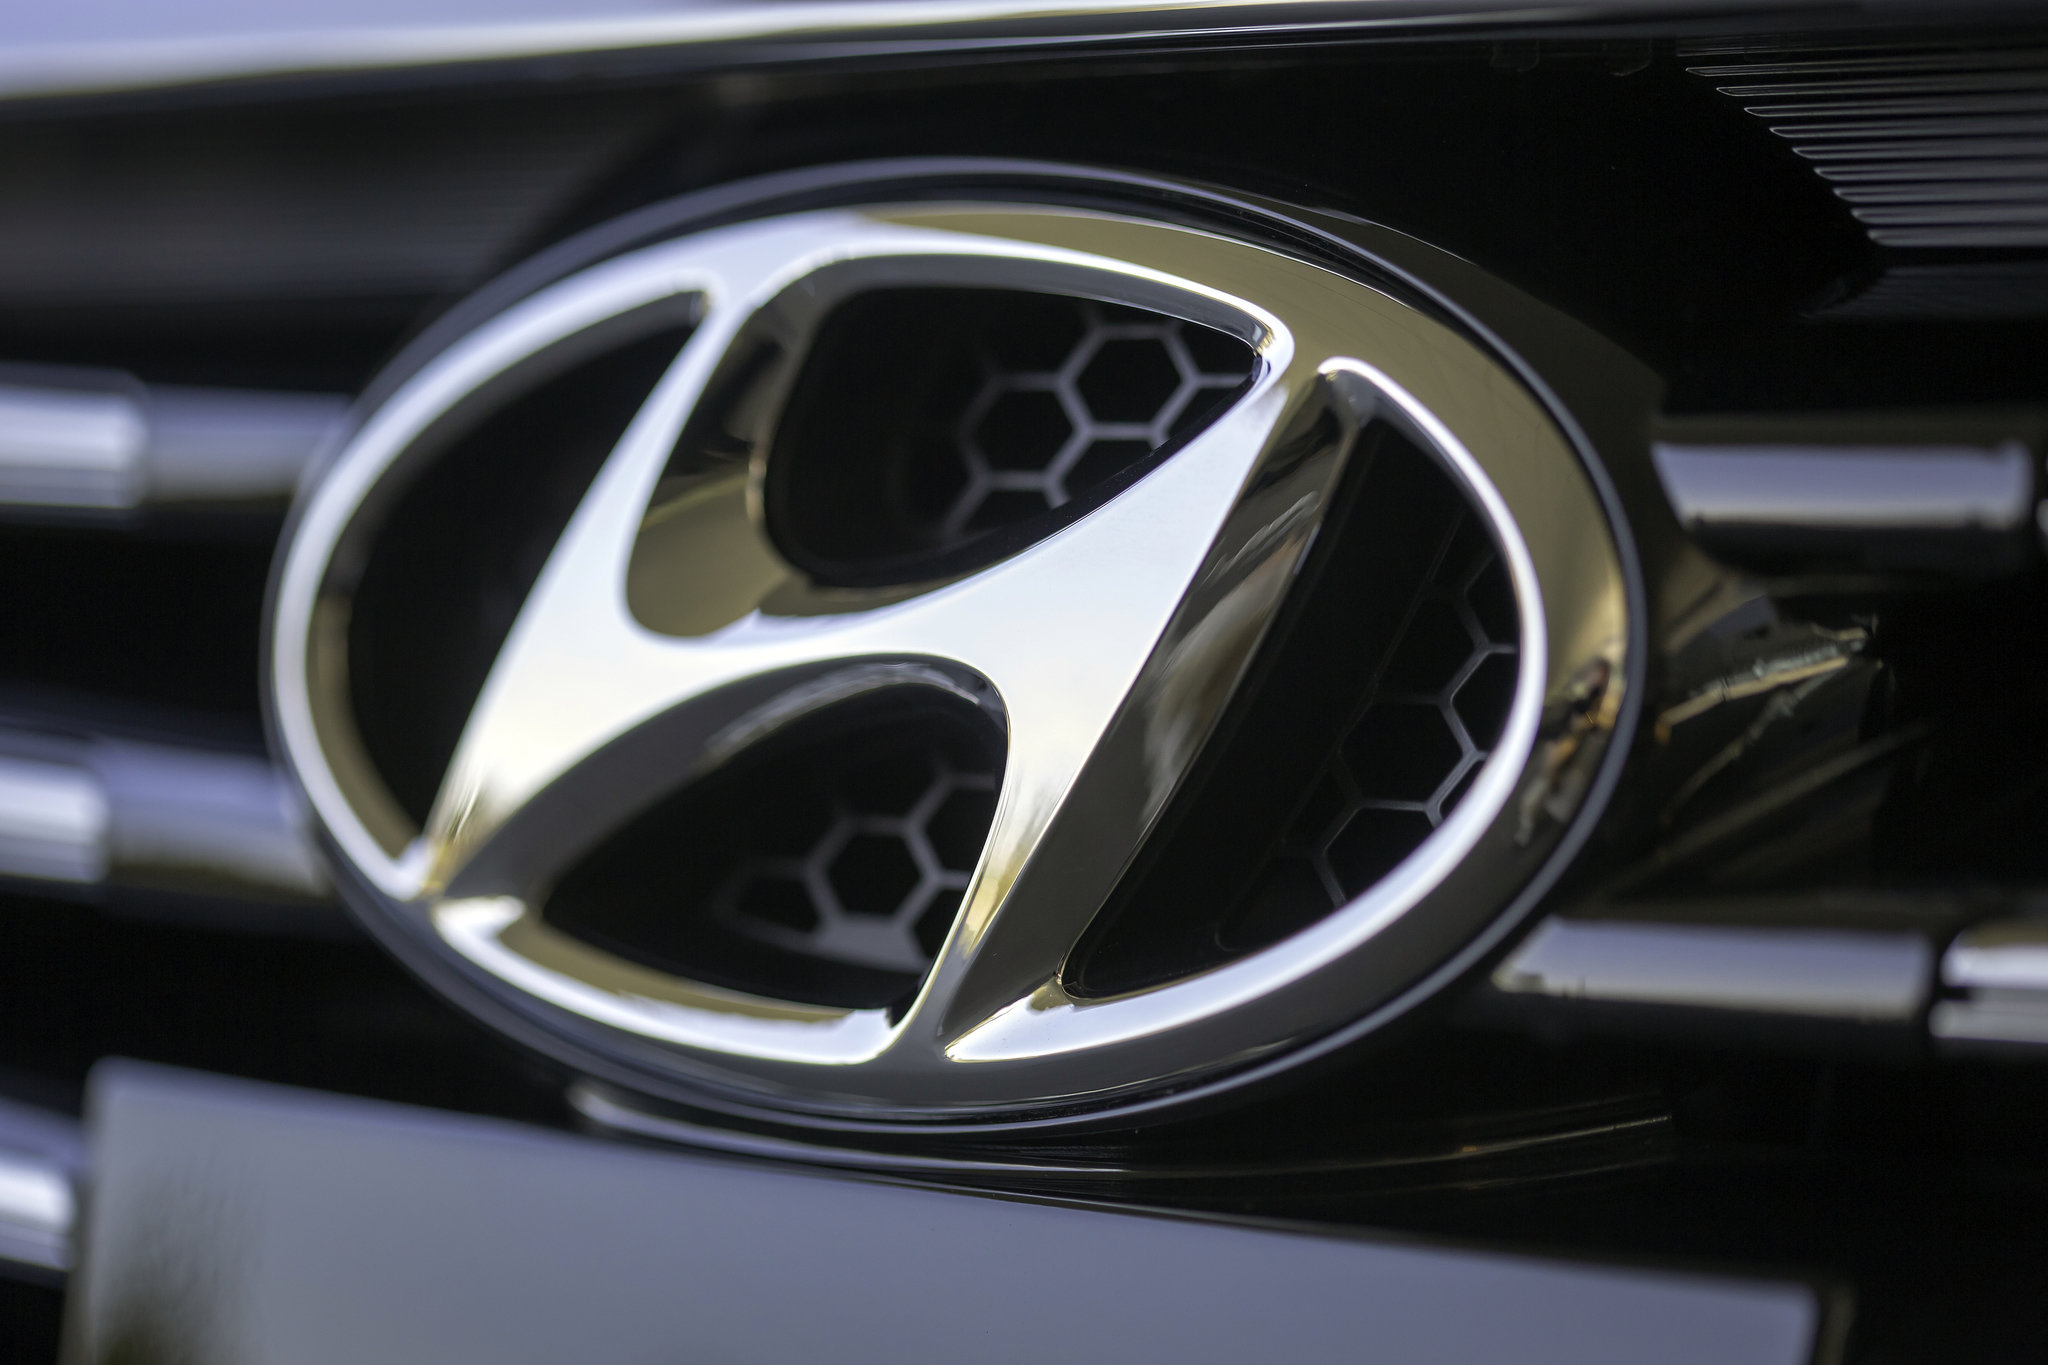 Safety group 'demands' Kia, Hyundai recall 2.9M cars due to spike in fire reports